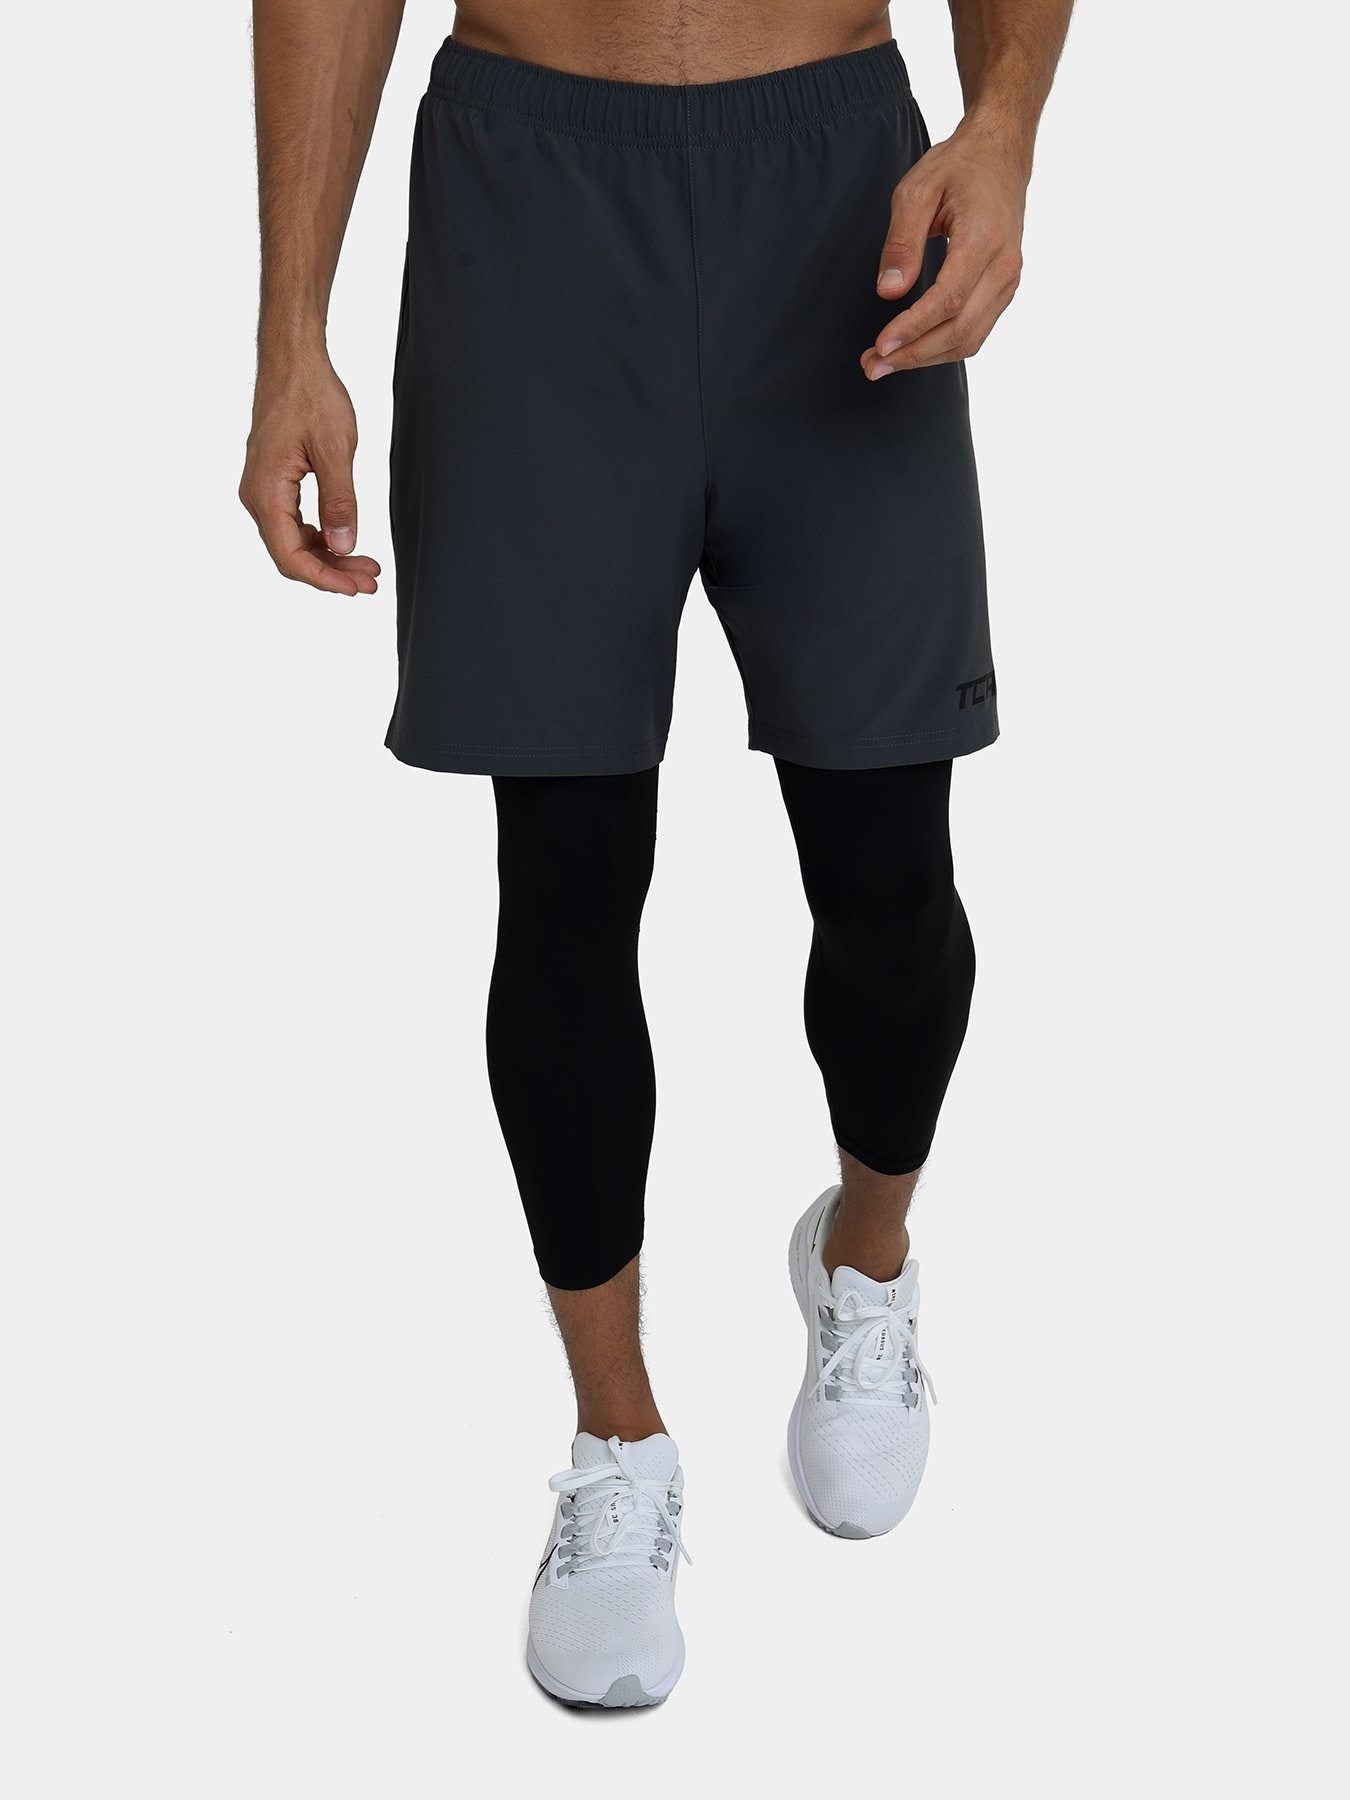 Ultra 2-in-1 Running Short & Internal Compression Tight For Men With Back Zip Pocket